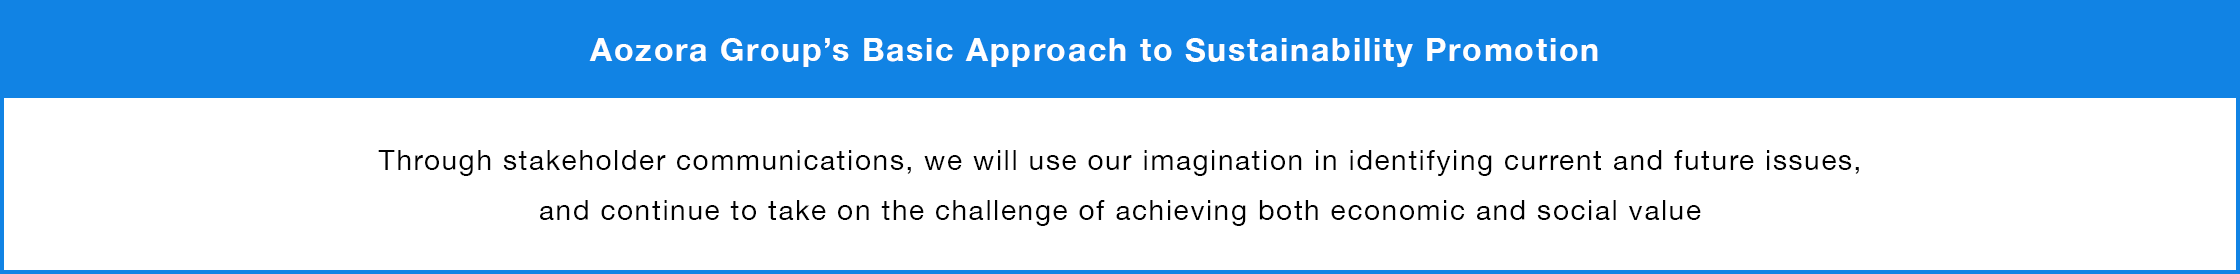 Basic Approach to Sustainability Promotion